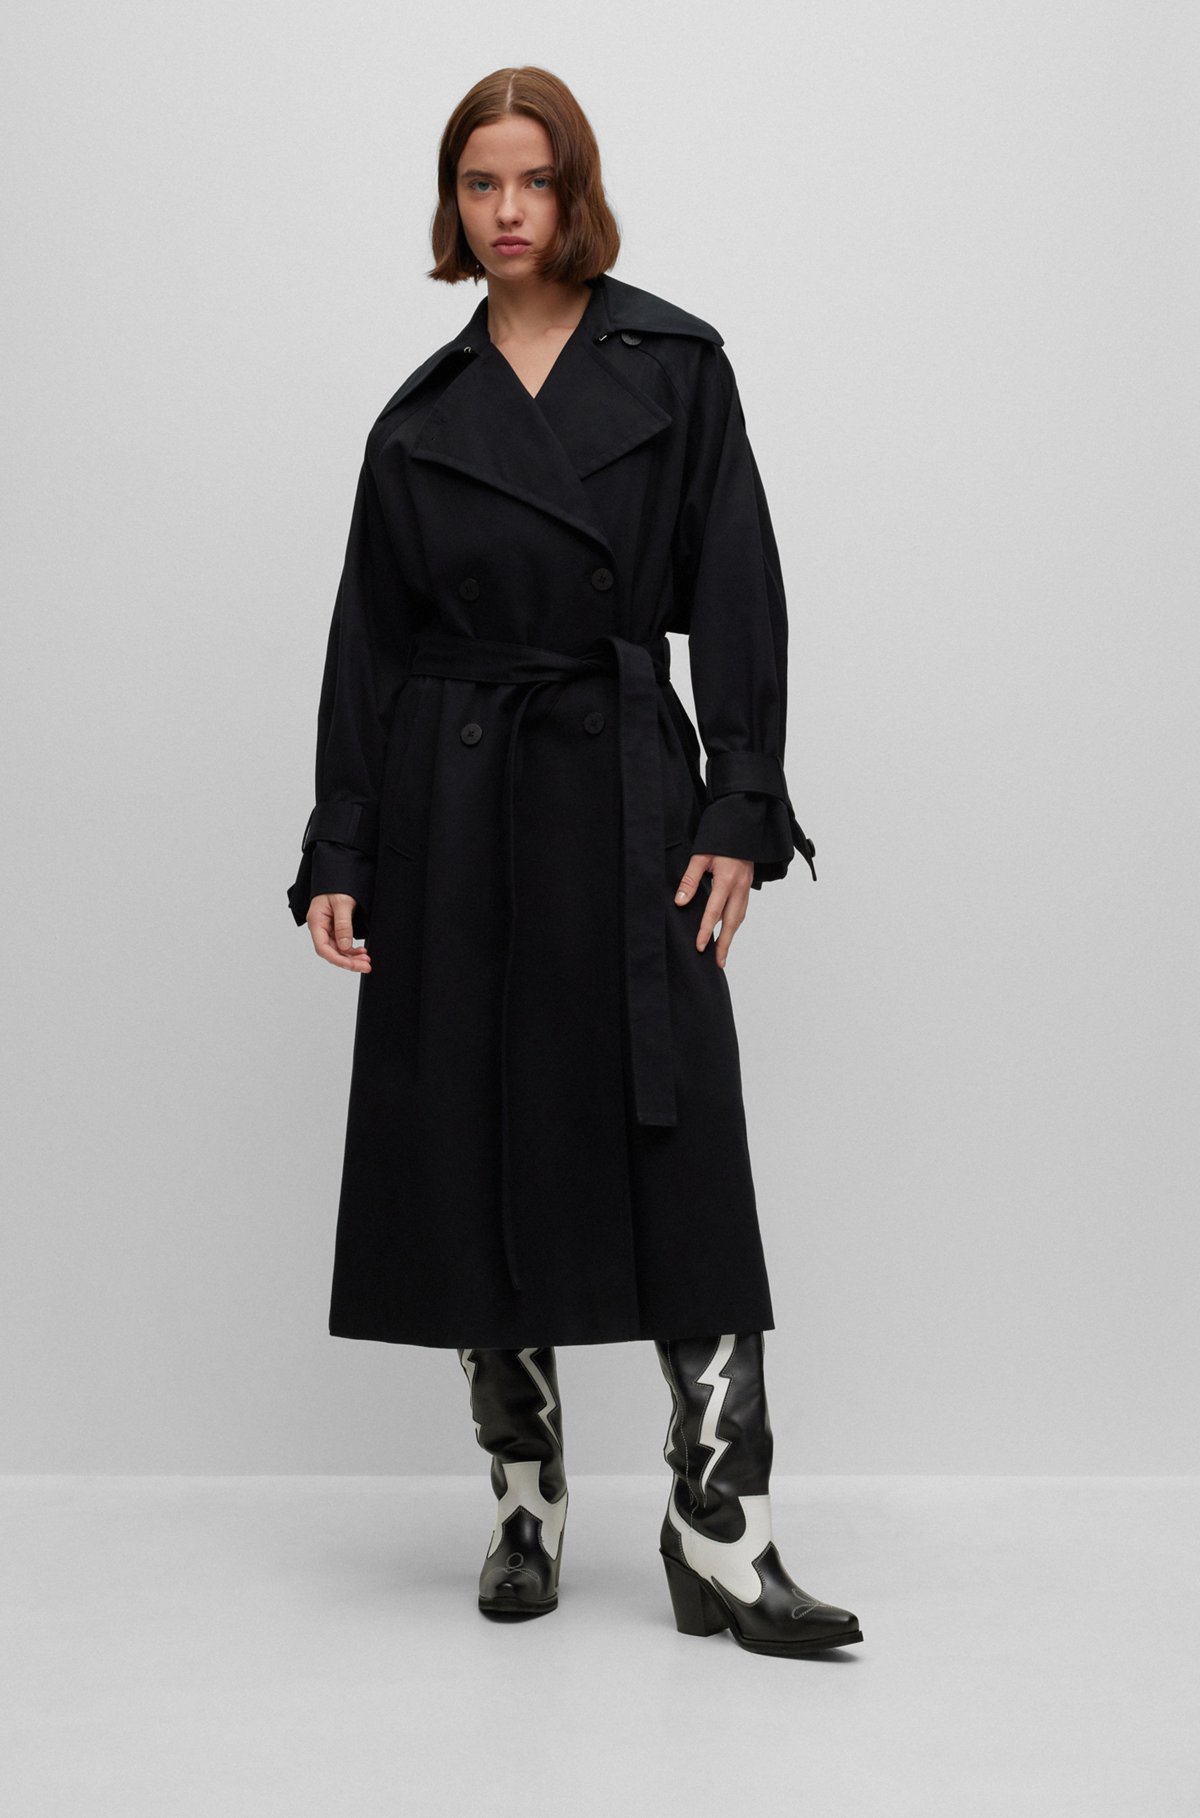 HUGO - Double-breasted trench coat in stretch cotton